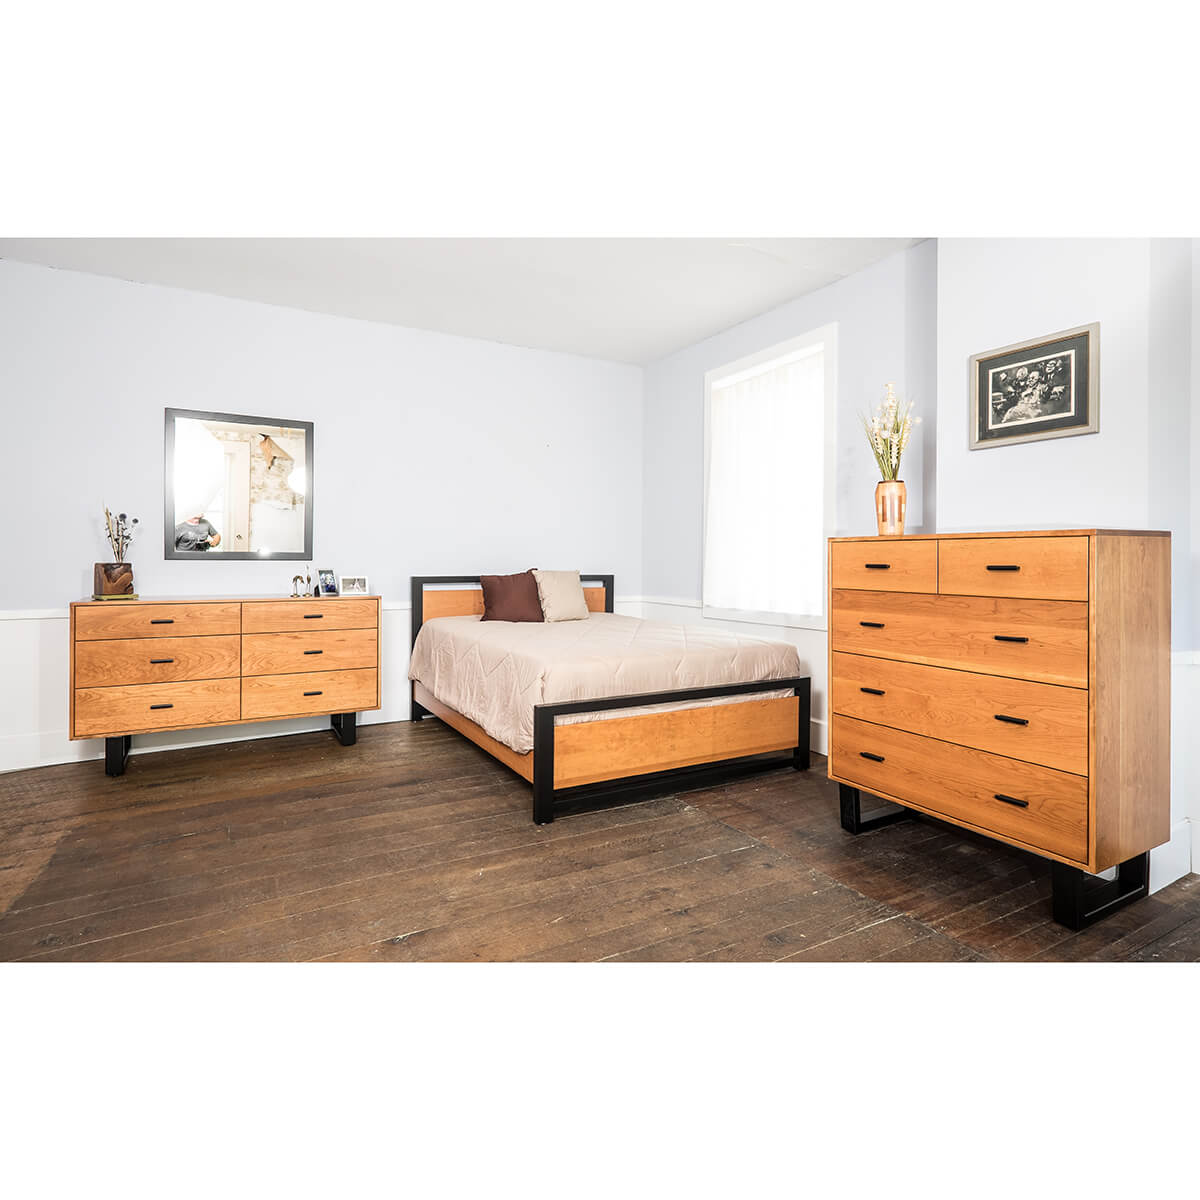 Read more about the article Sullivan Park Bedroom Collection